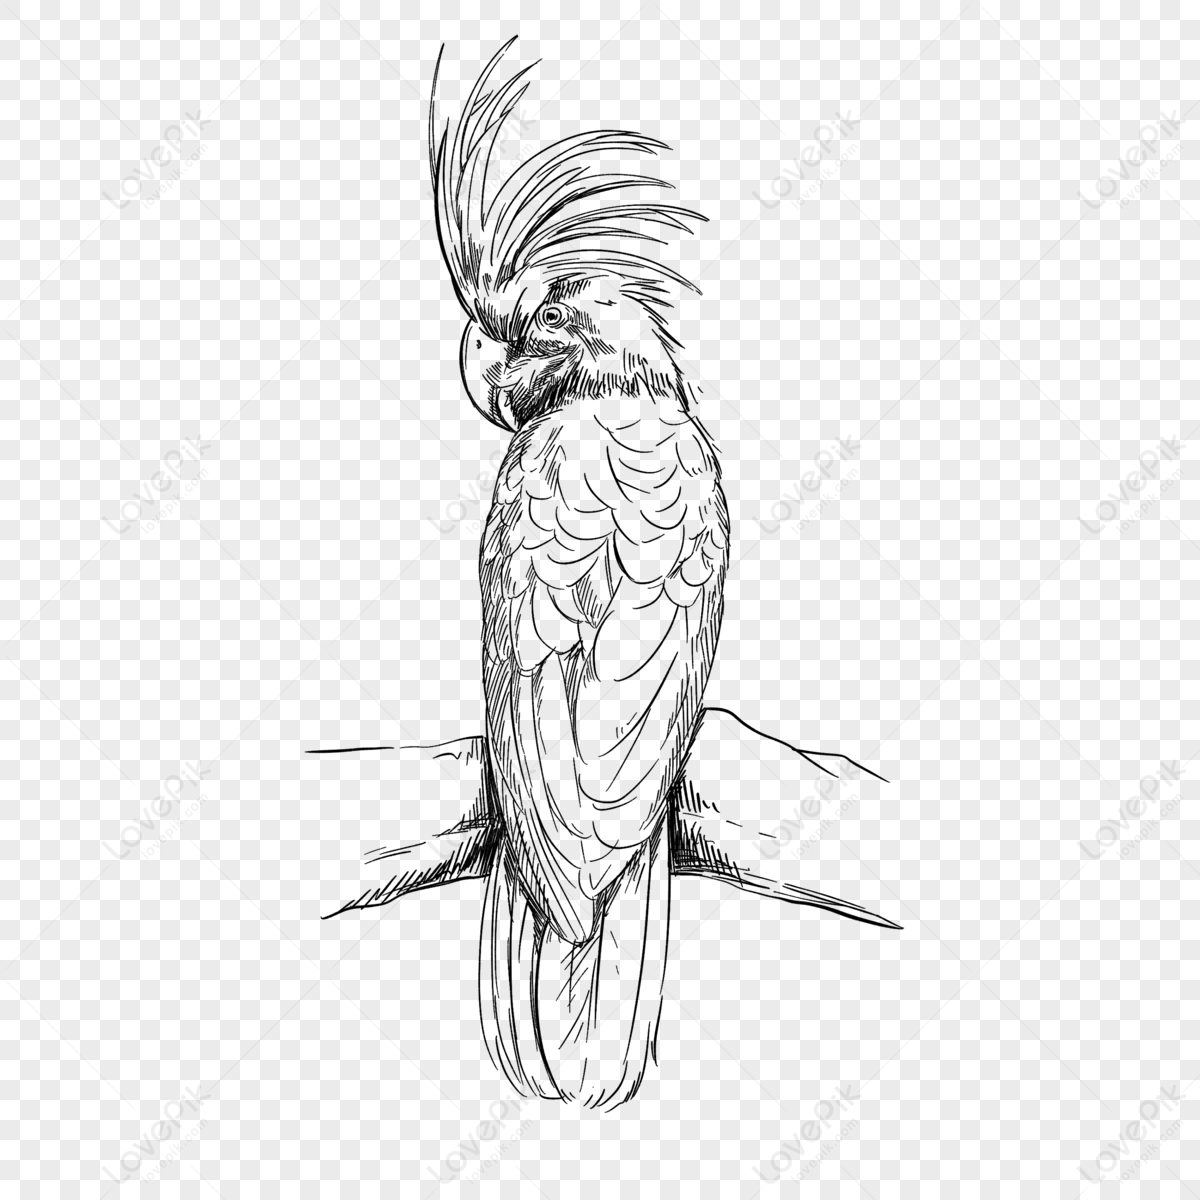 Buy Parrot Drawing Online In India - Etsy India